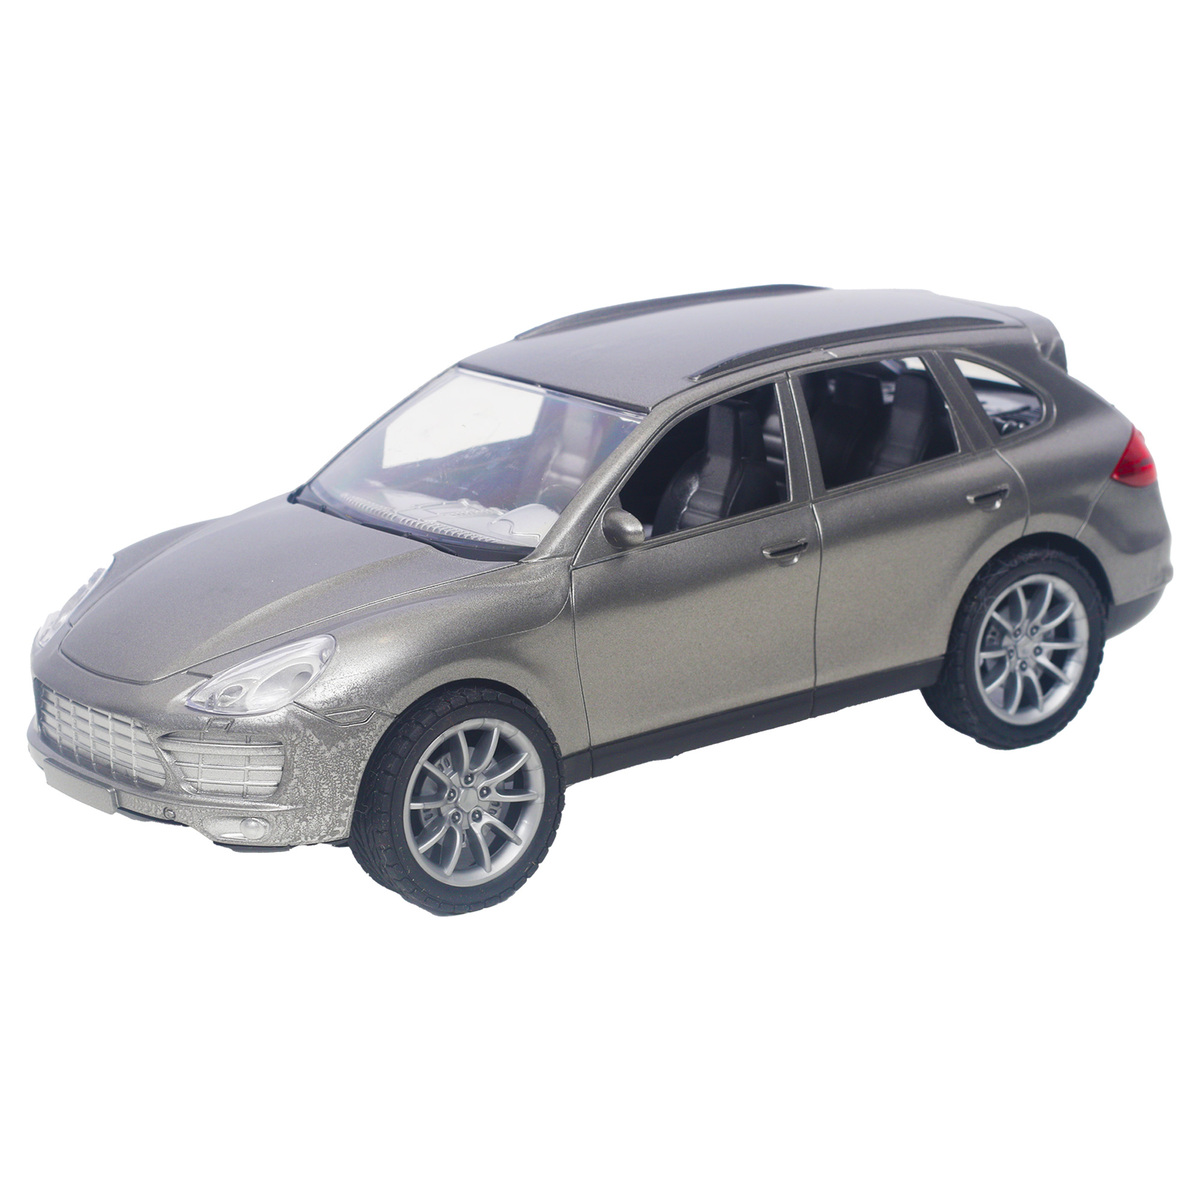 Skid Fusion Model Friction Car 1:18 8018-1 Assorted